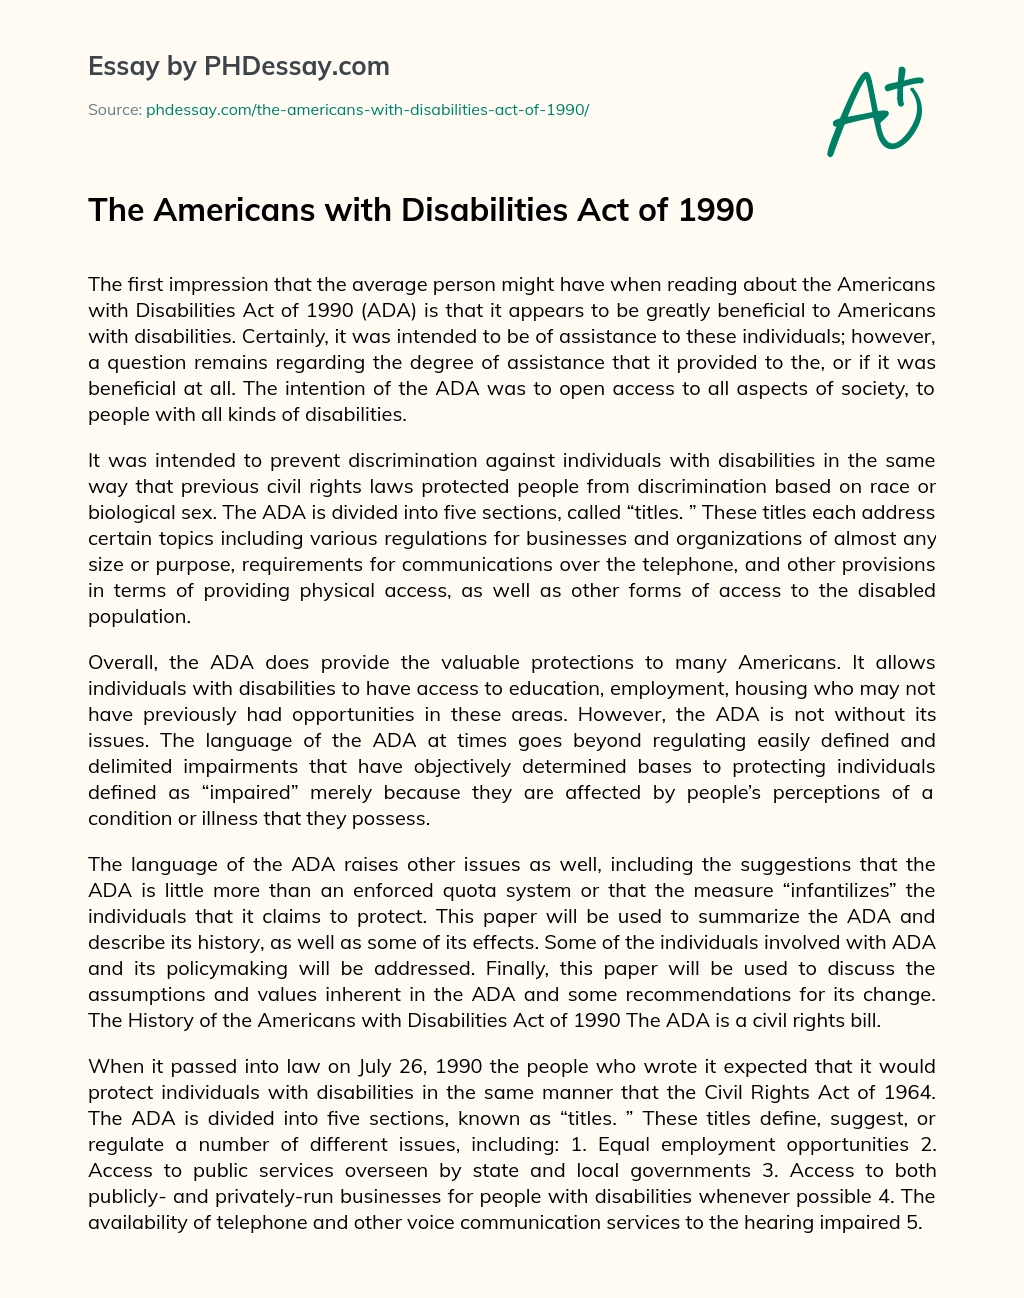 The Americans with Disabilities Act of 1990 essay